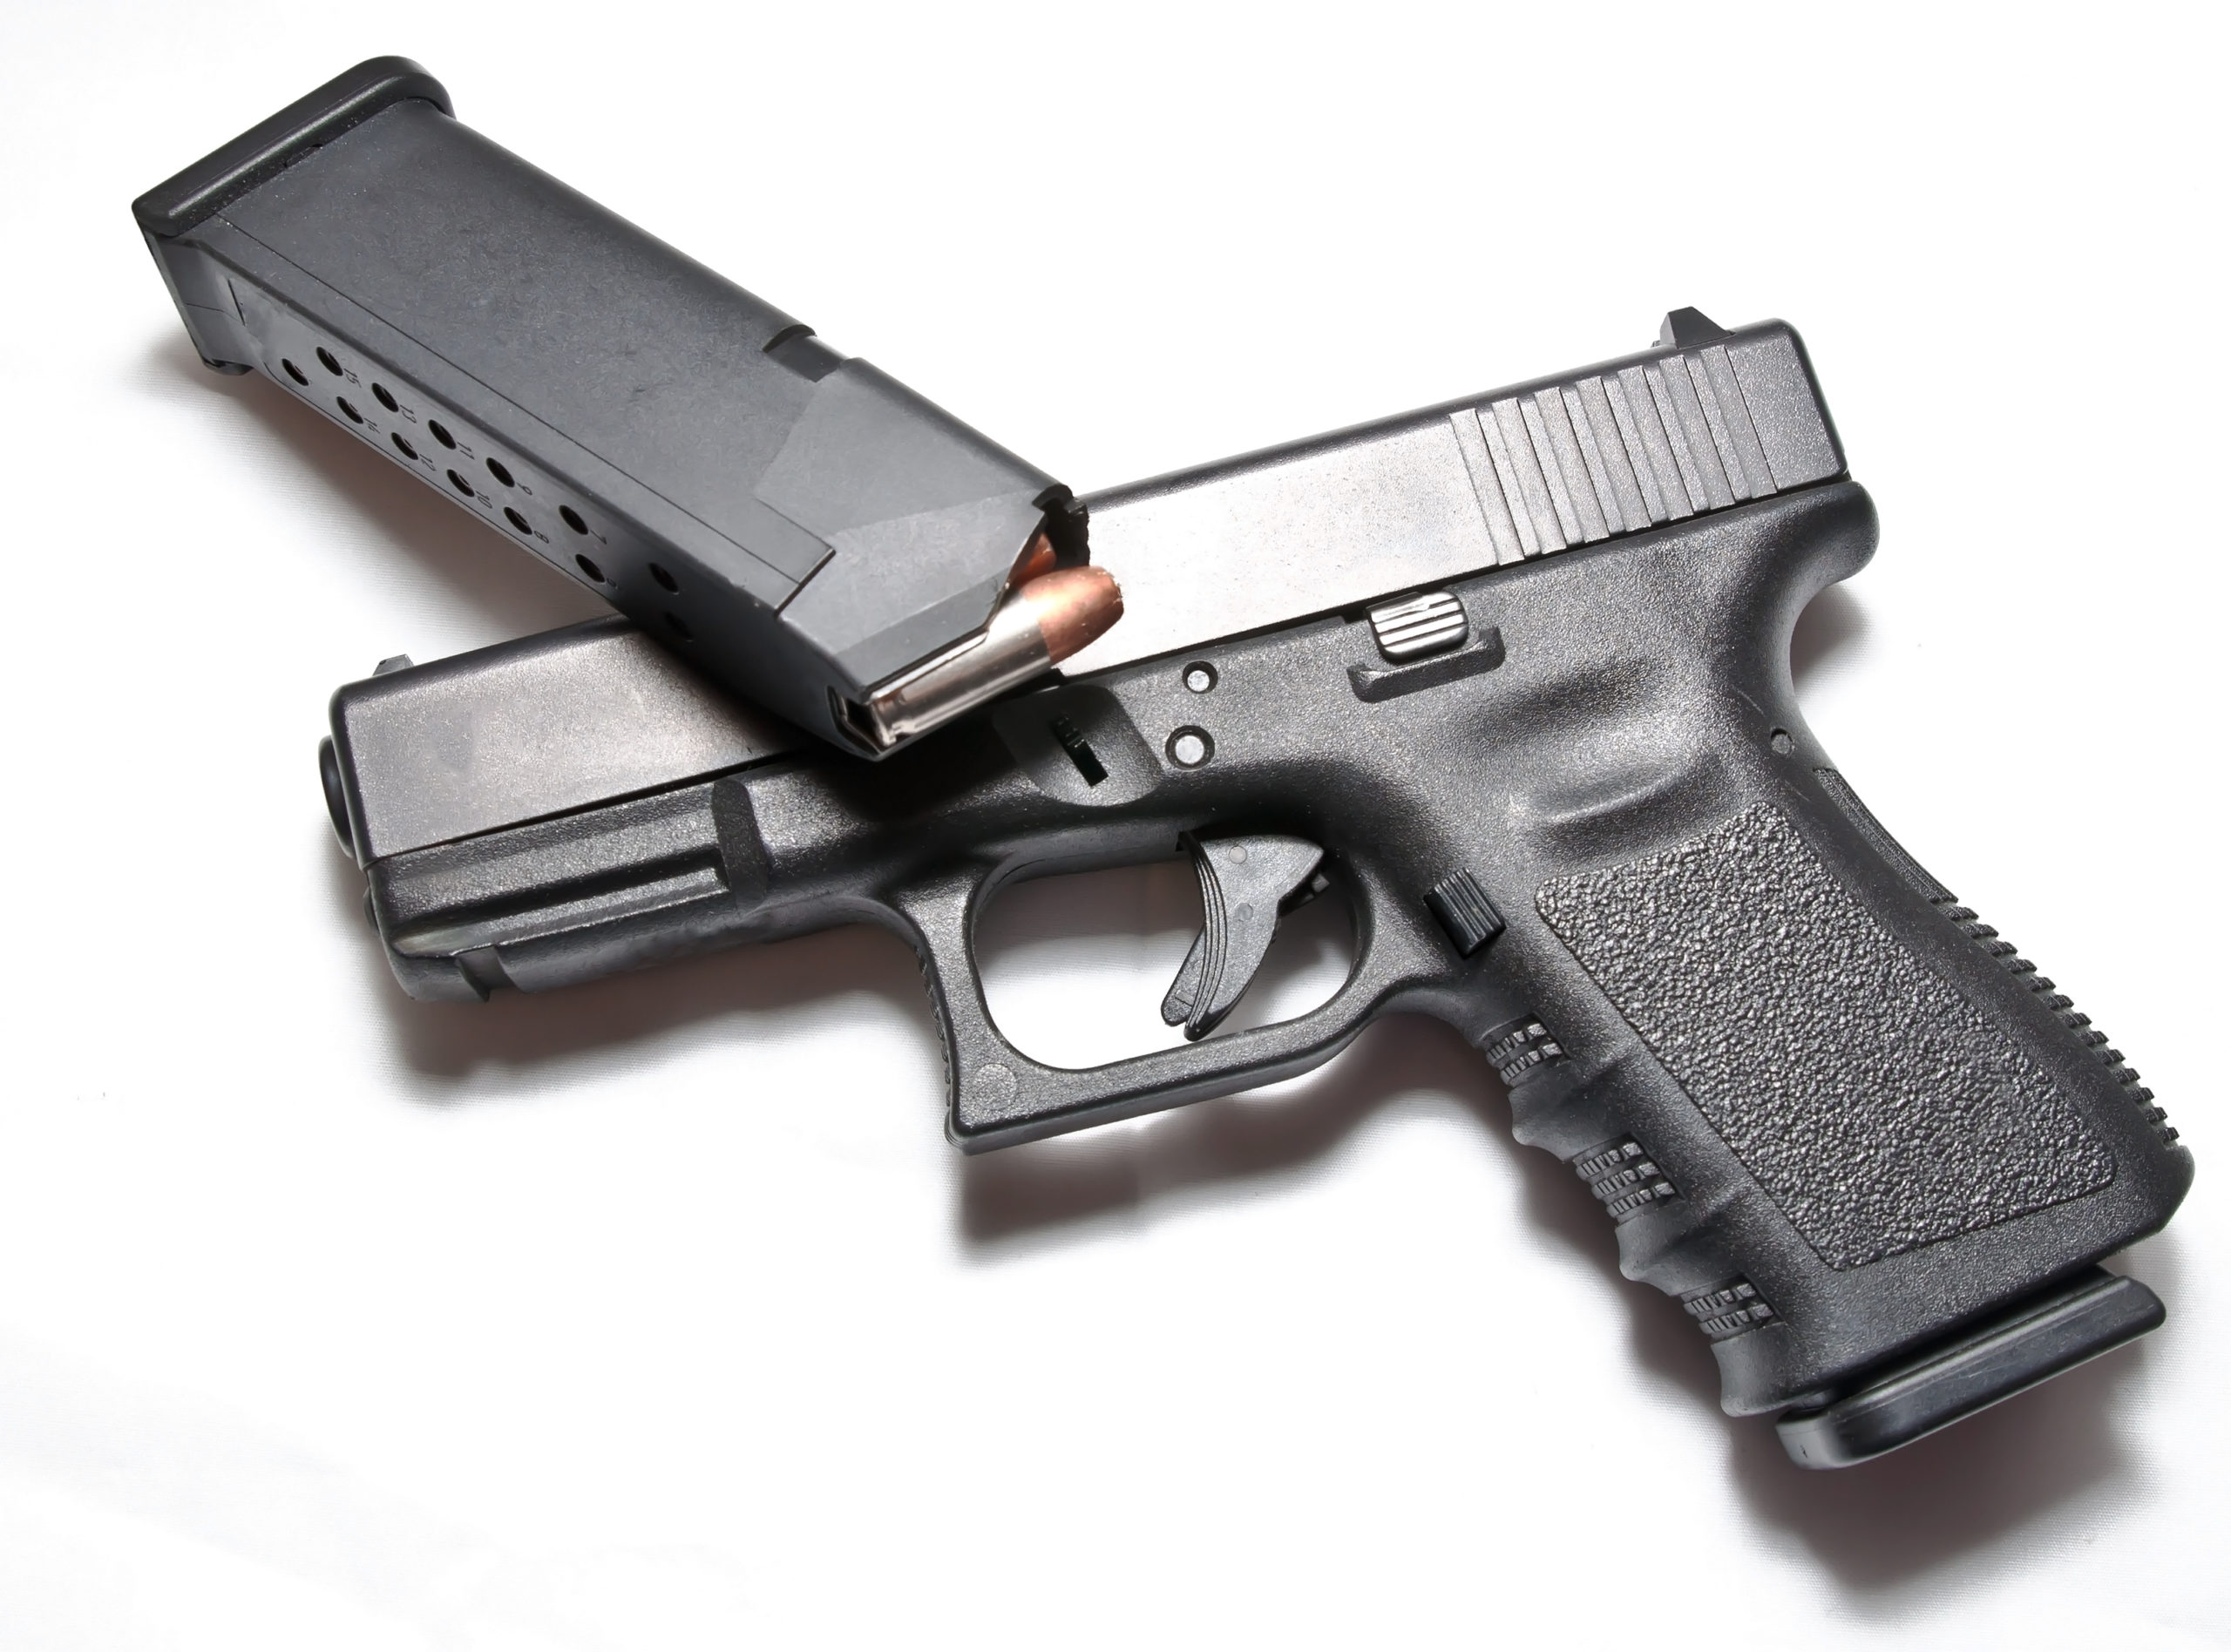 A semi automatic black pistol with a loaded pistol magazine laying on top of it on a white background